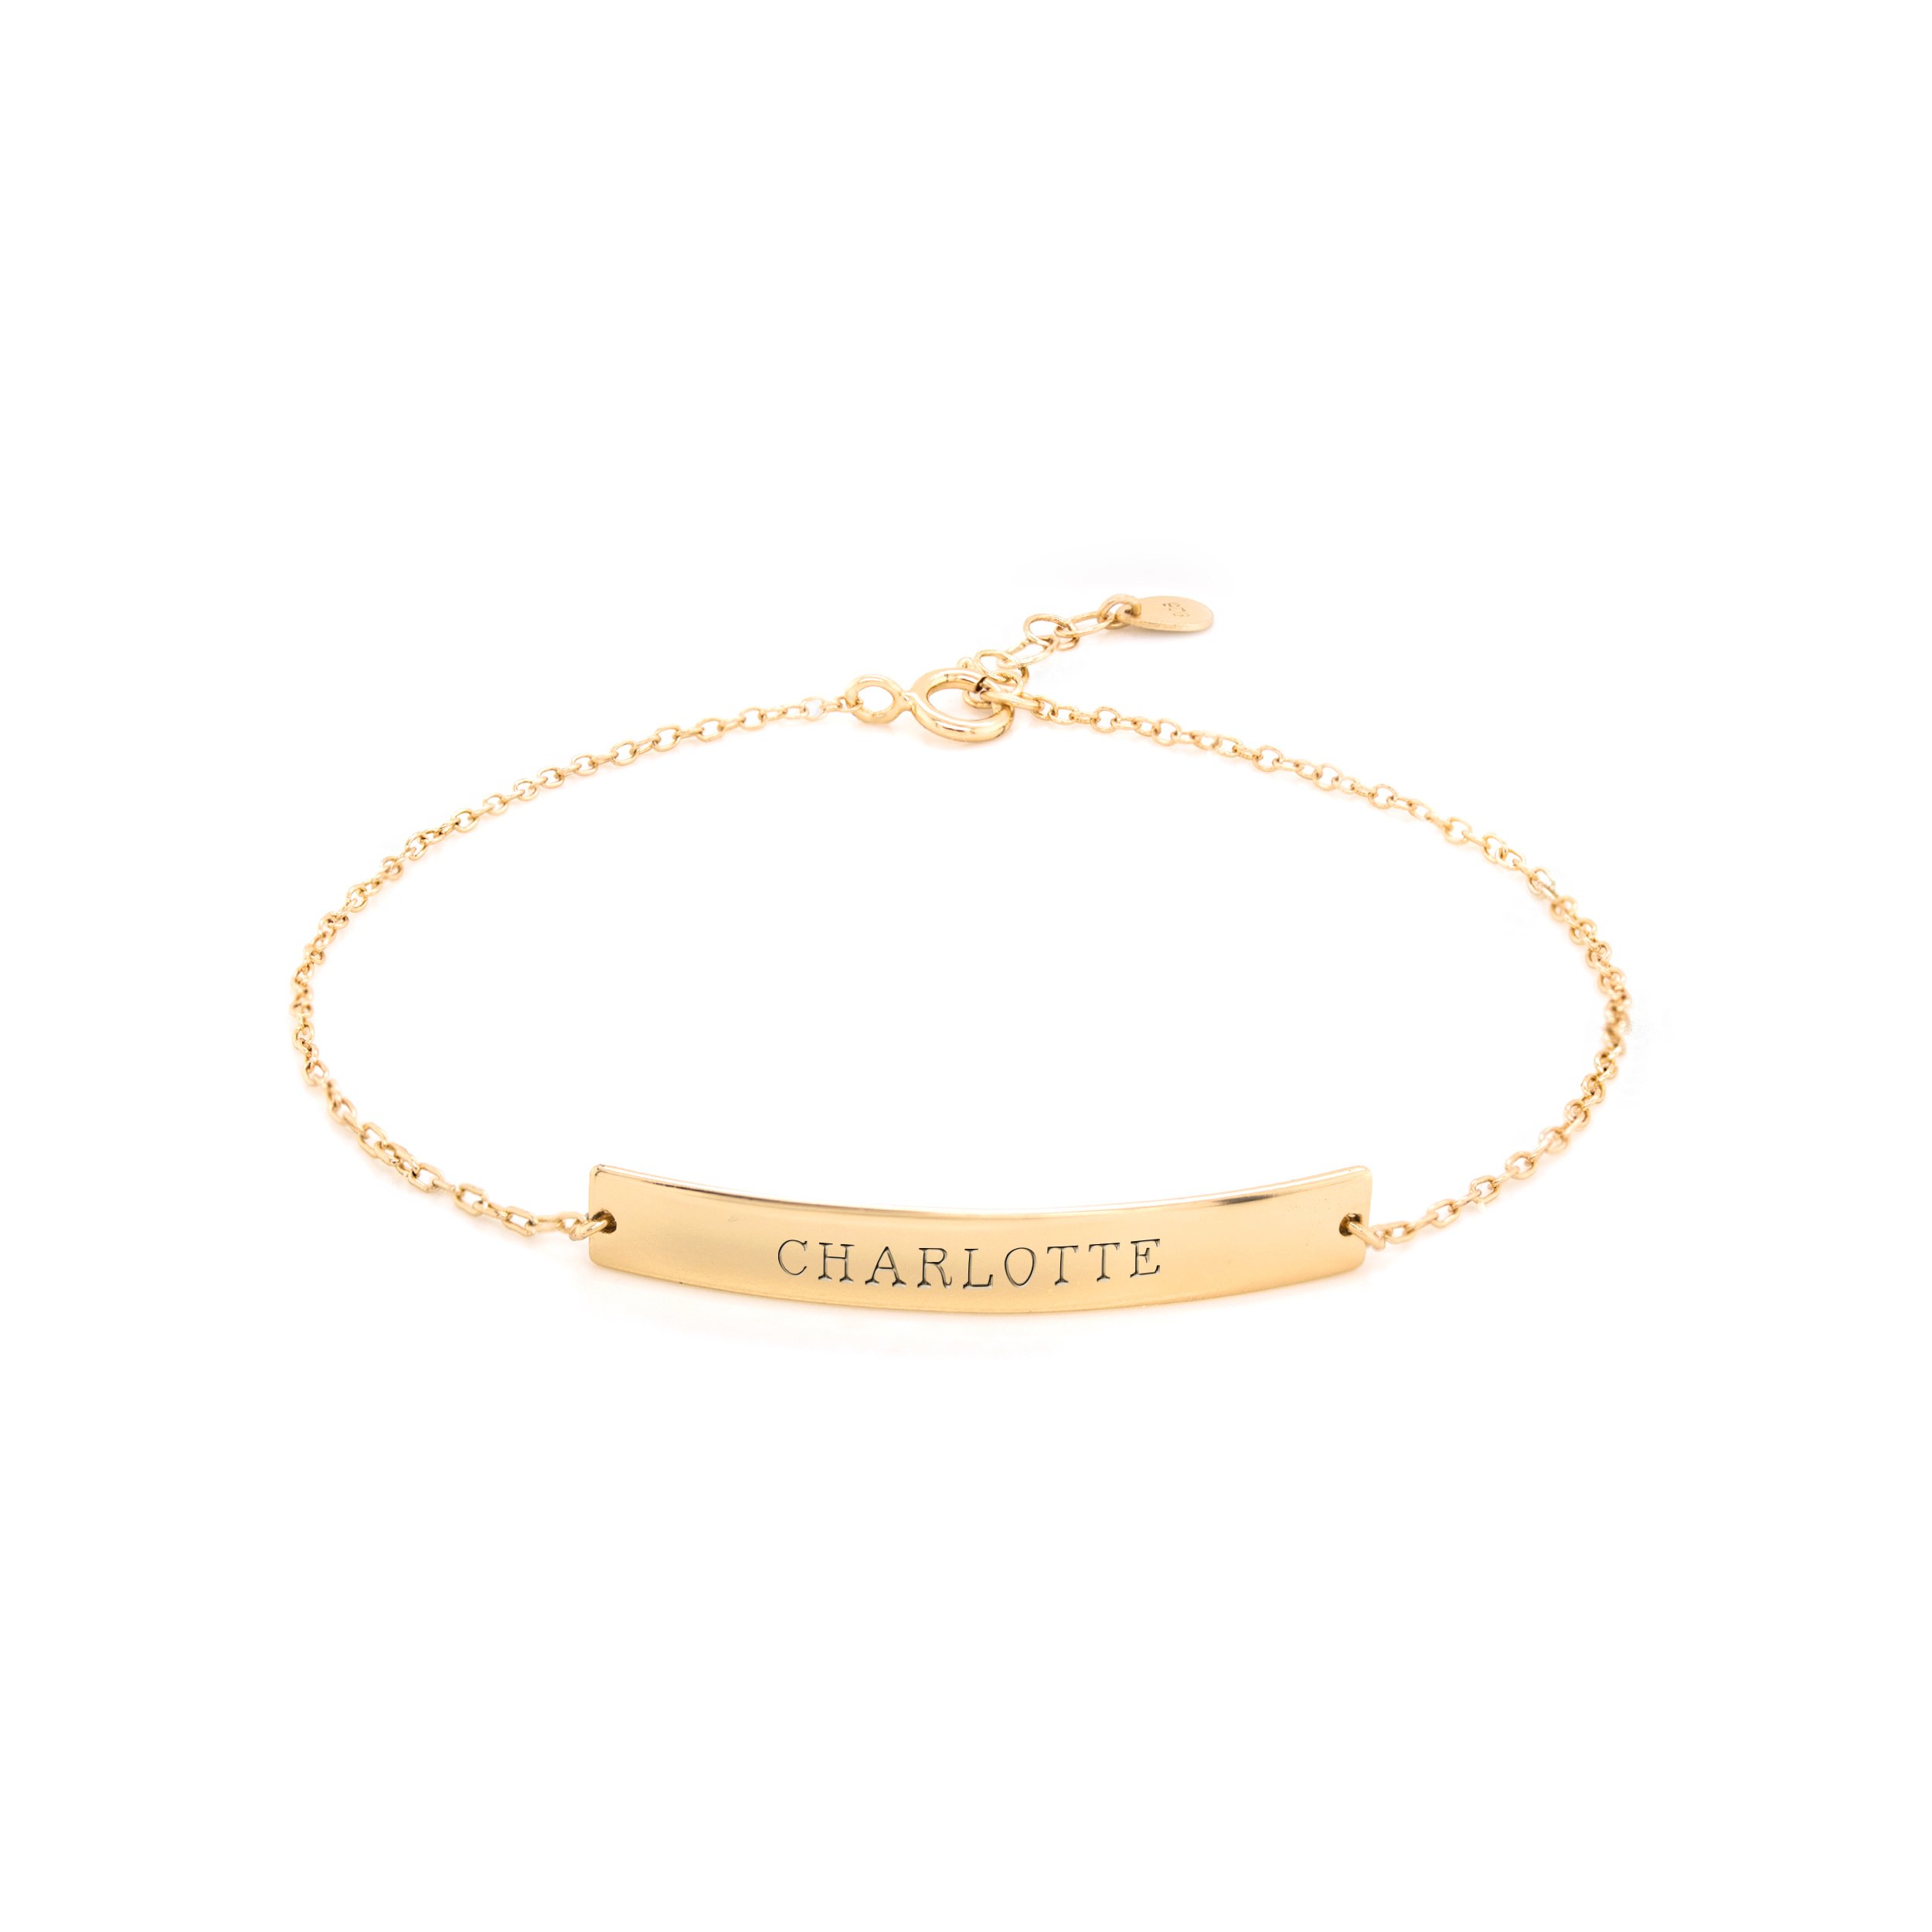 Personalized gold bracelet for mother's day